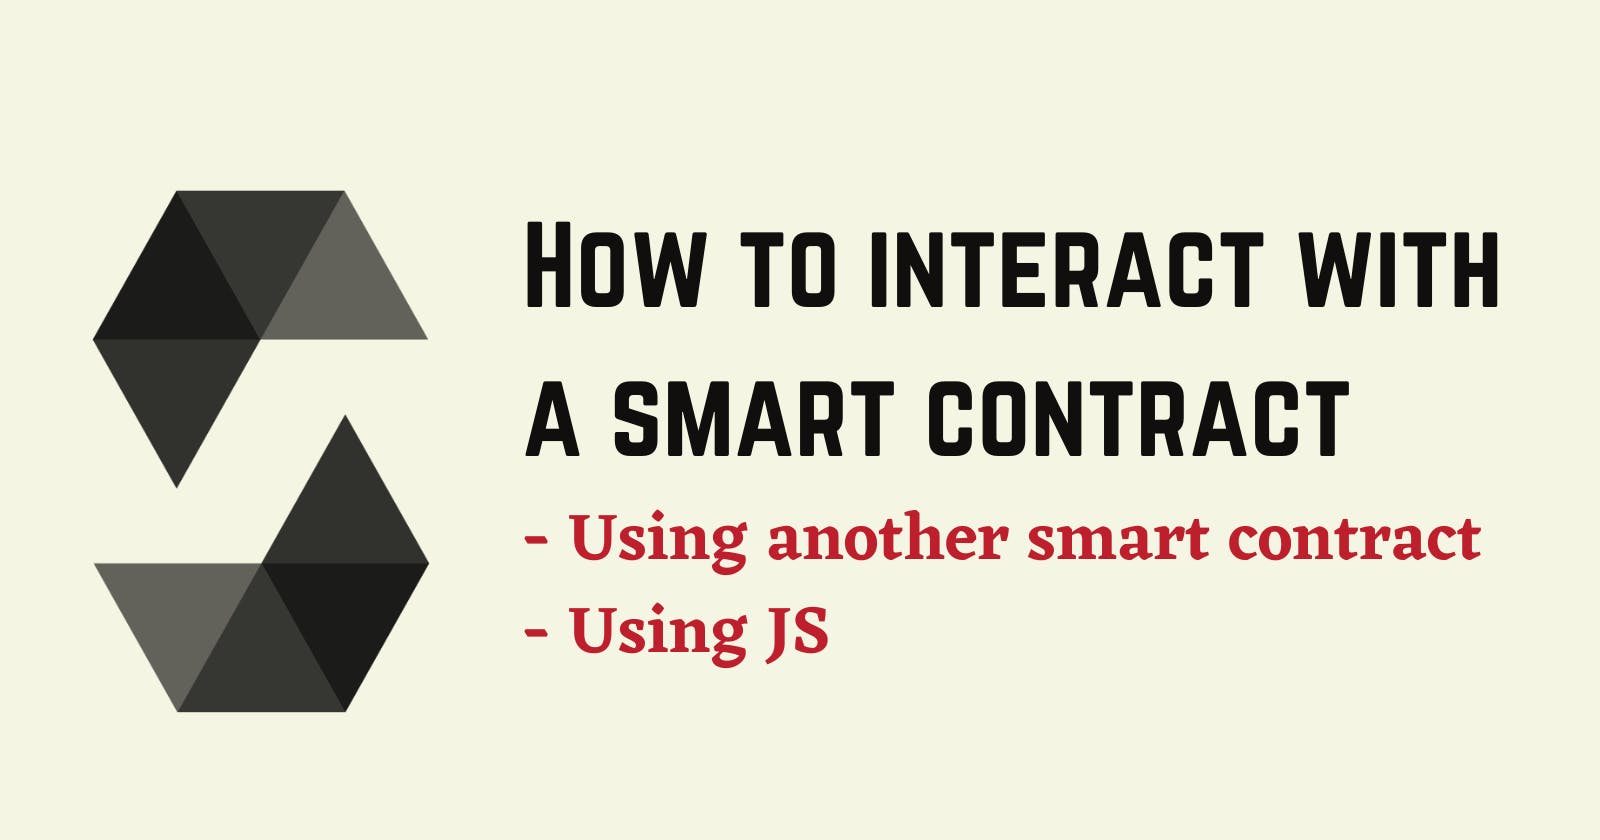 How to interact with another smart contract